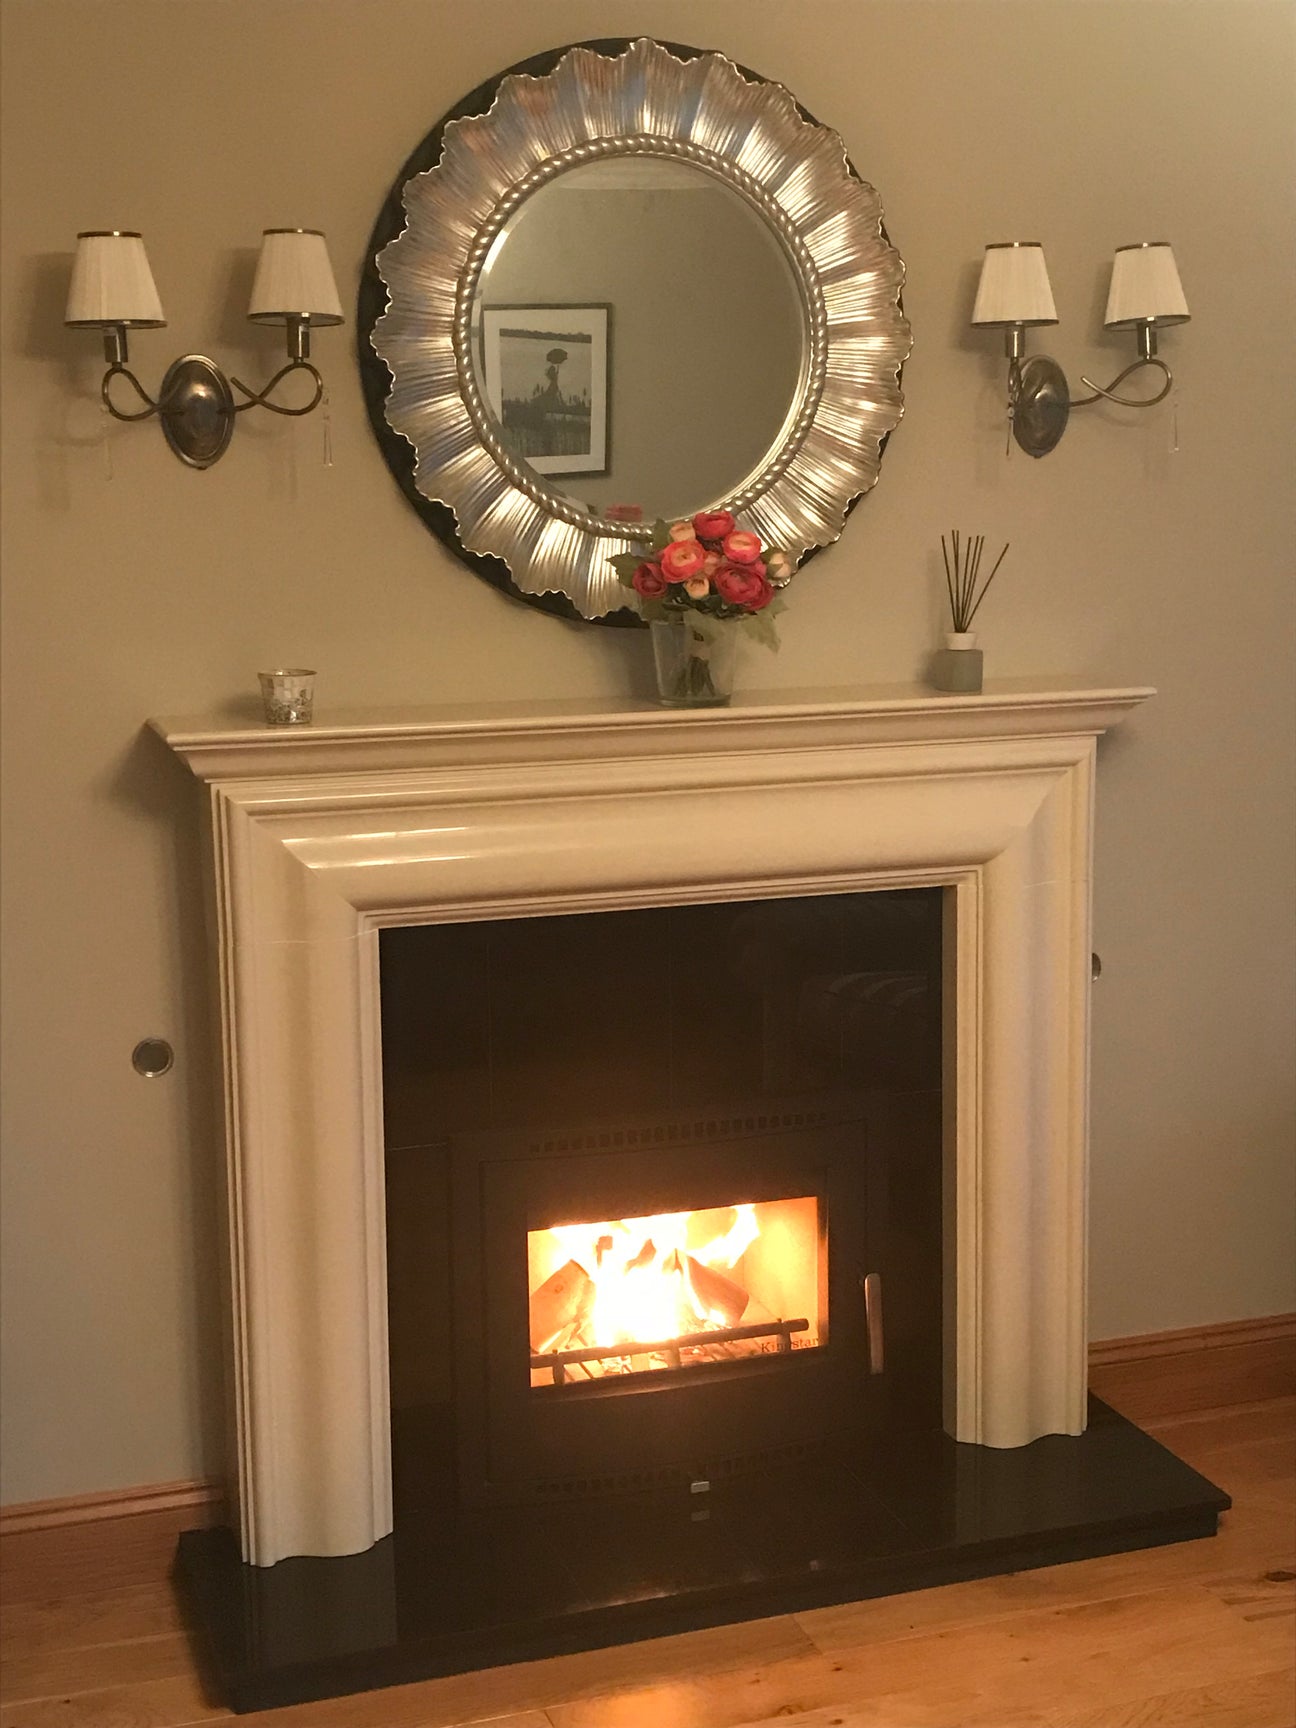 Side Image of Shannon Eco Stove with marble fireplace